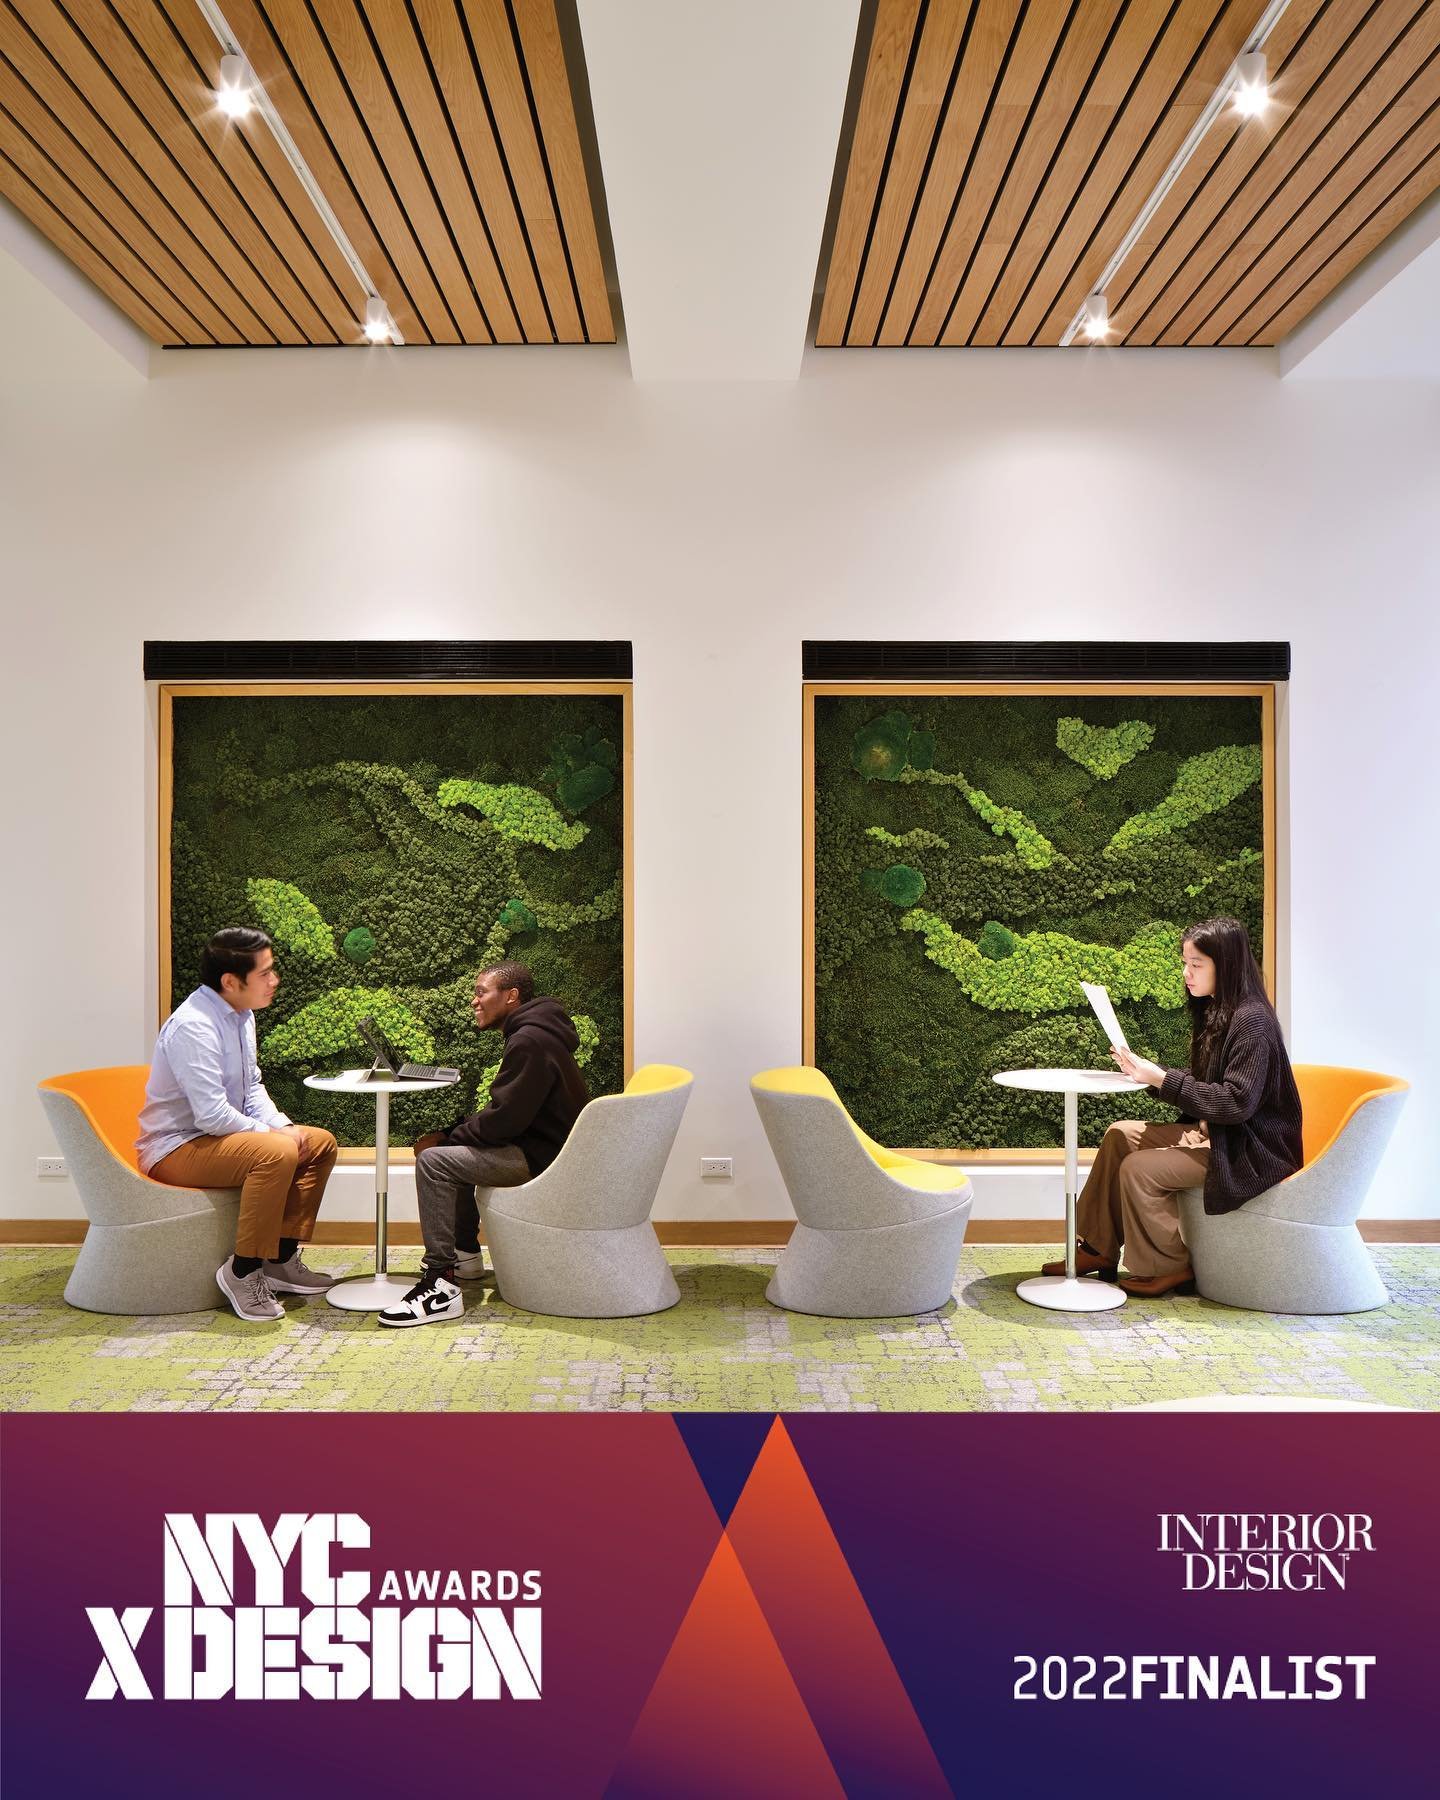 We are #NYCxDESIGN finalists! Thank you @nycxdesign and @interiordesignmag for the honor!

Our recent renovation of an ad hoc and largely &ldquo;leftover&rdquo; lounge space at @msm.nyc transformed the first floor of the 1910 historic building into a